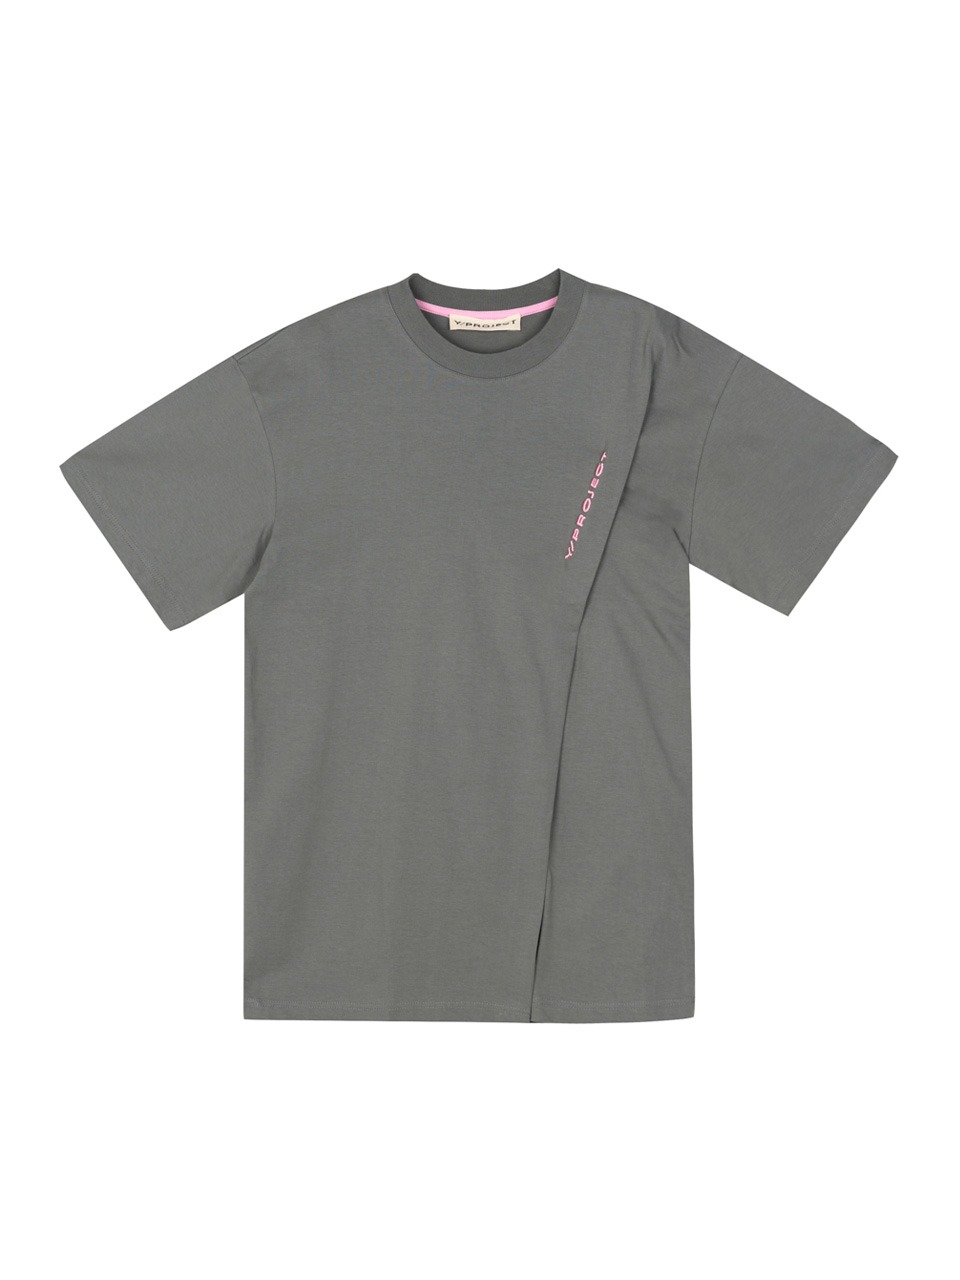 Y/PROJECT - PINCHED LOGO T SHIRT (KHAKI)